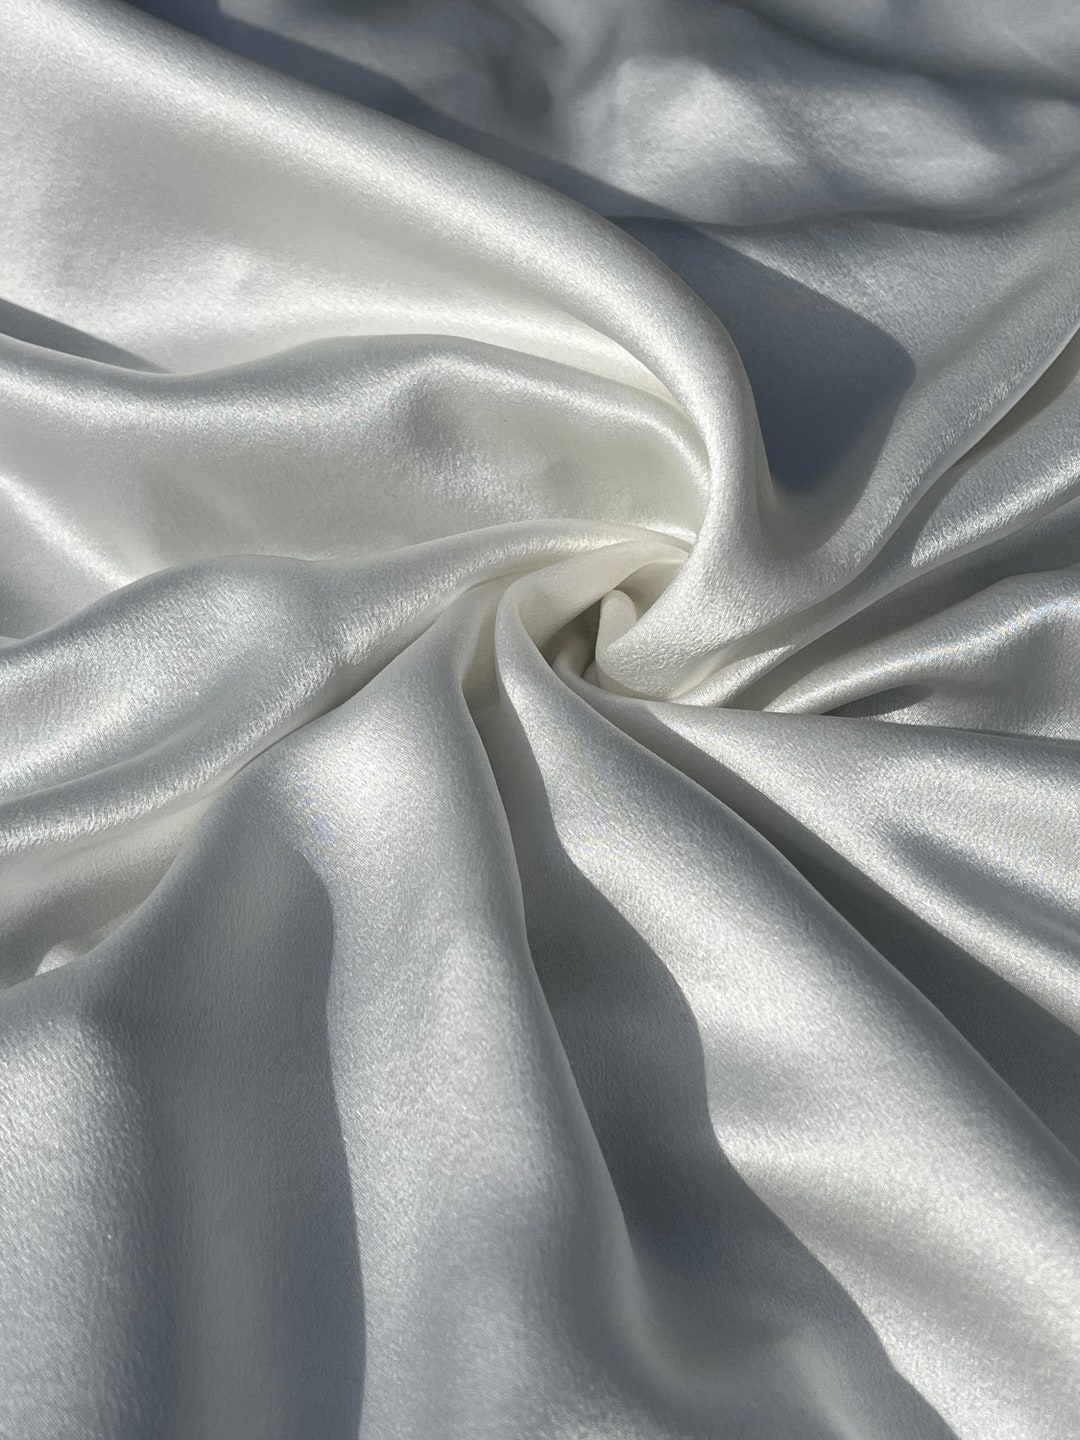 White Satin Pure Mulberry Silk Fabric by the Yard, Extra Wide Width ...